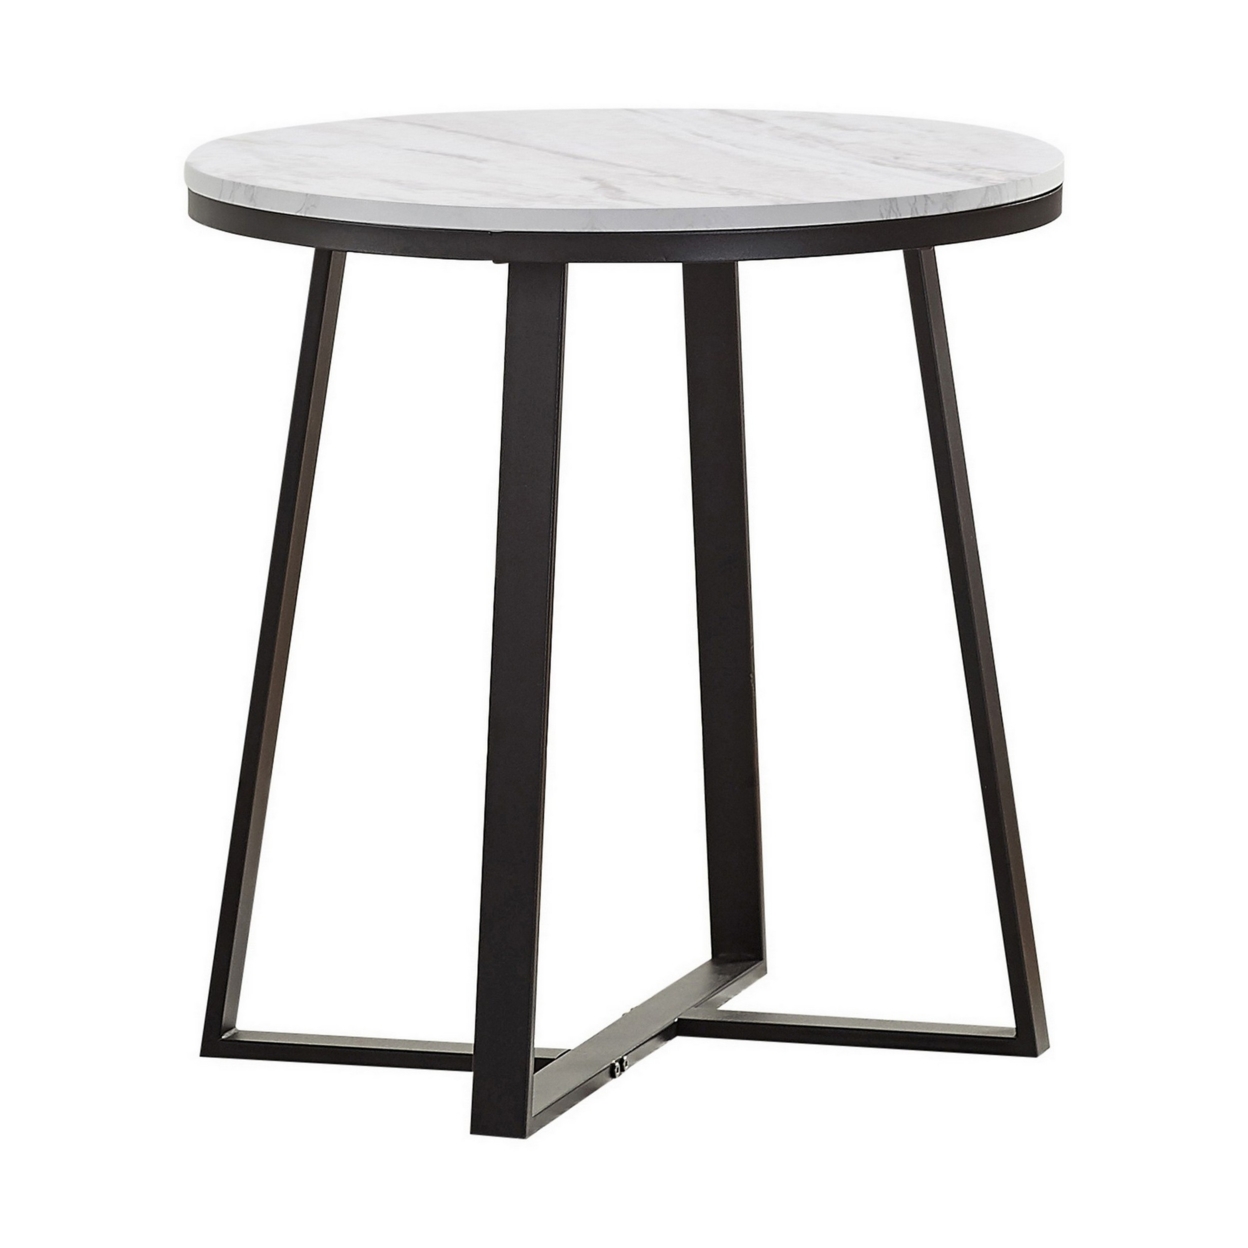 24 Inch End Table, White Faux Marble Round Top, Artisanal Metal Framework